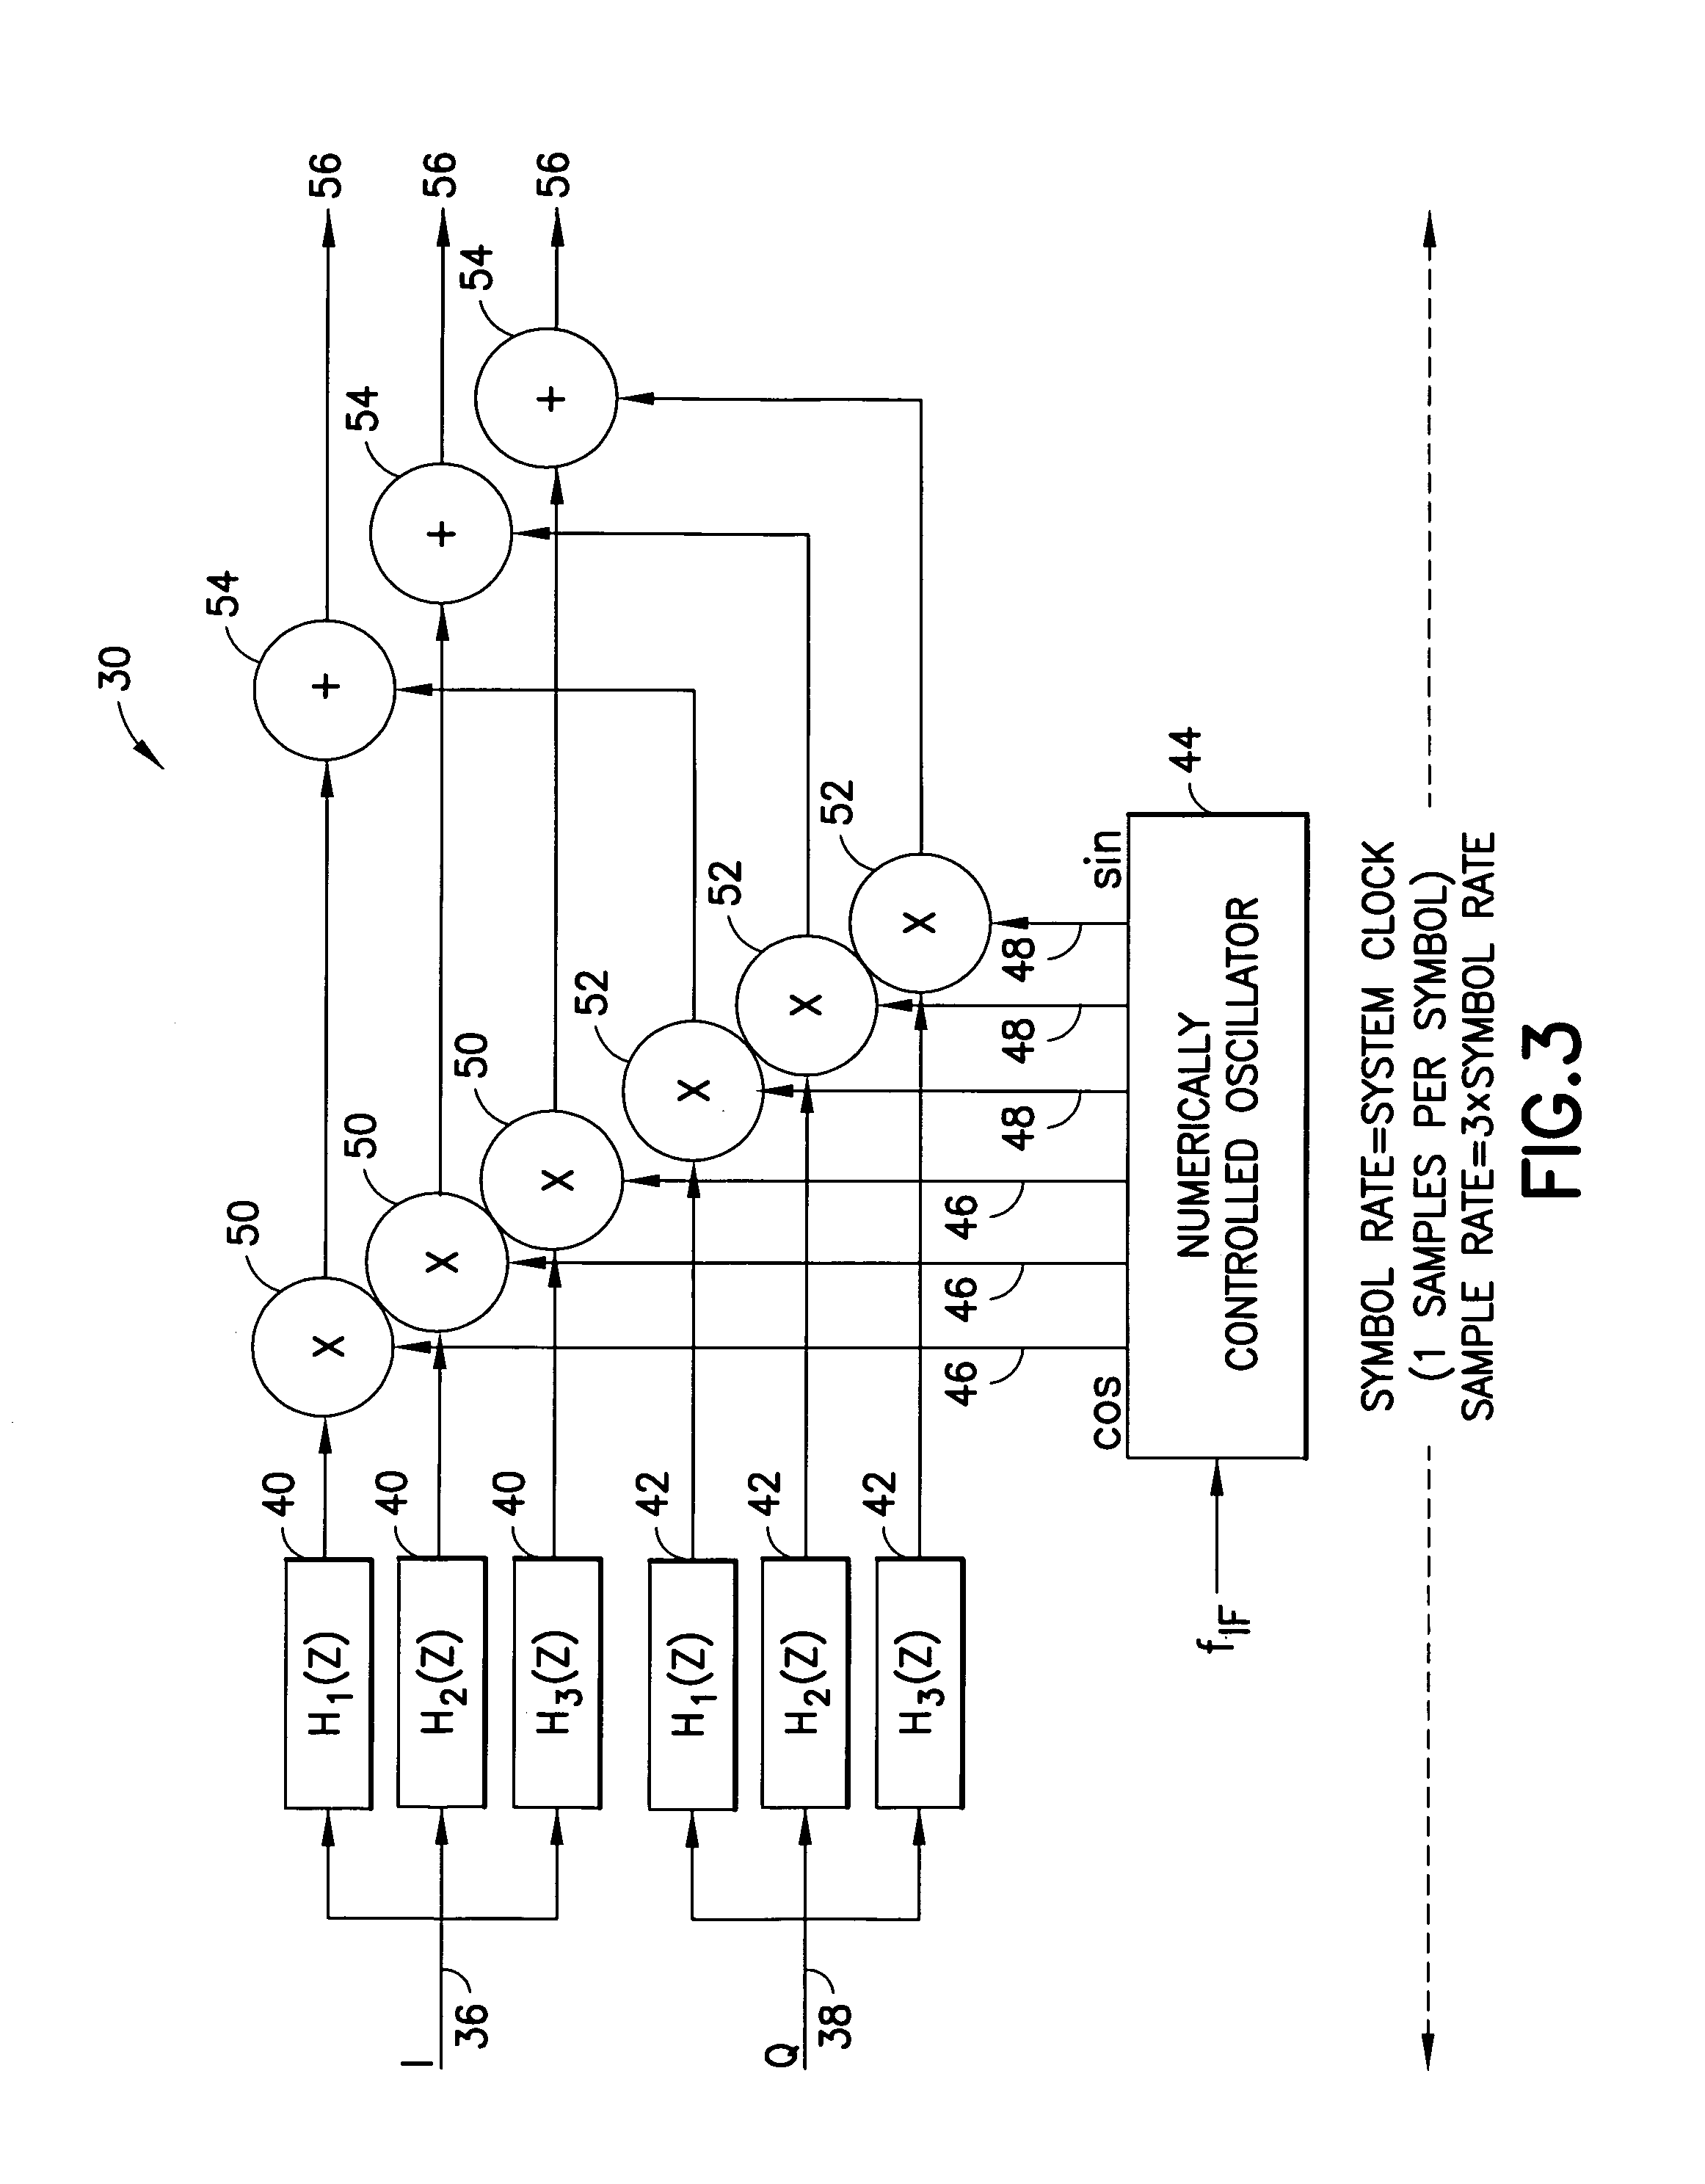 Parallel processing for programmable wideband digital modulation